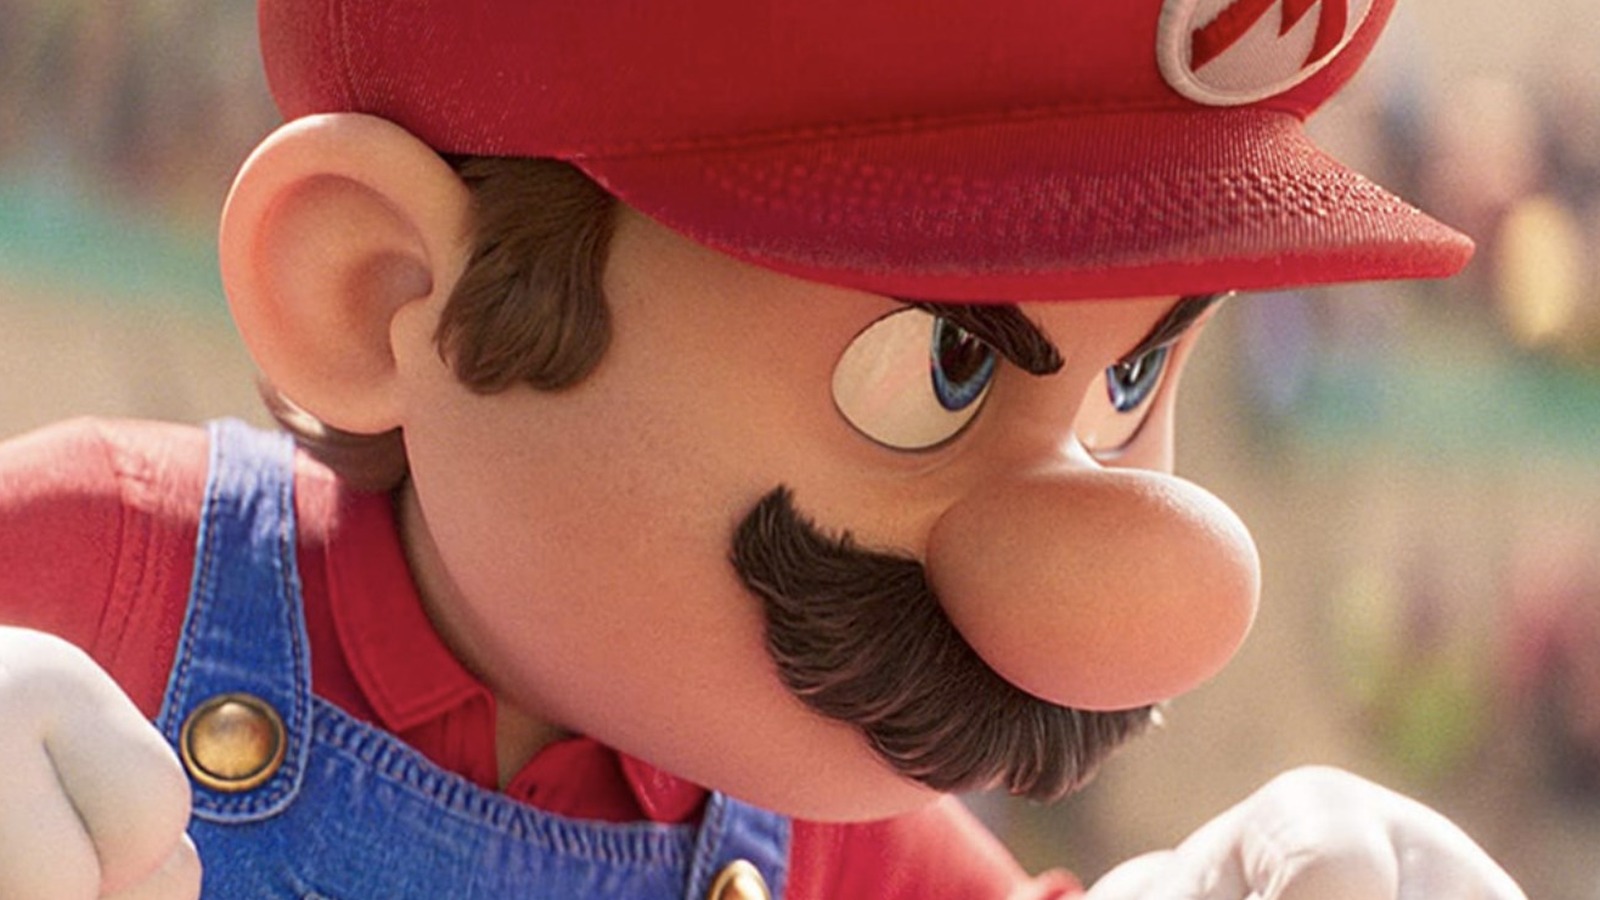 Should You, a Grown-Up, See 'The Super Mario Bros.' Movie in the Theater?